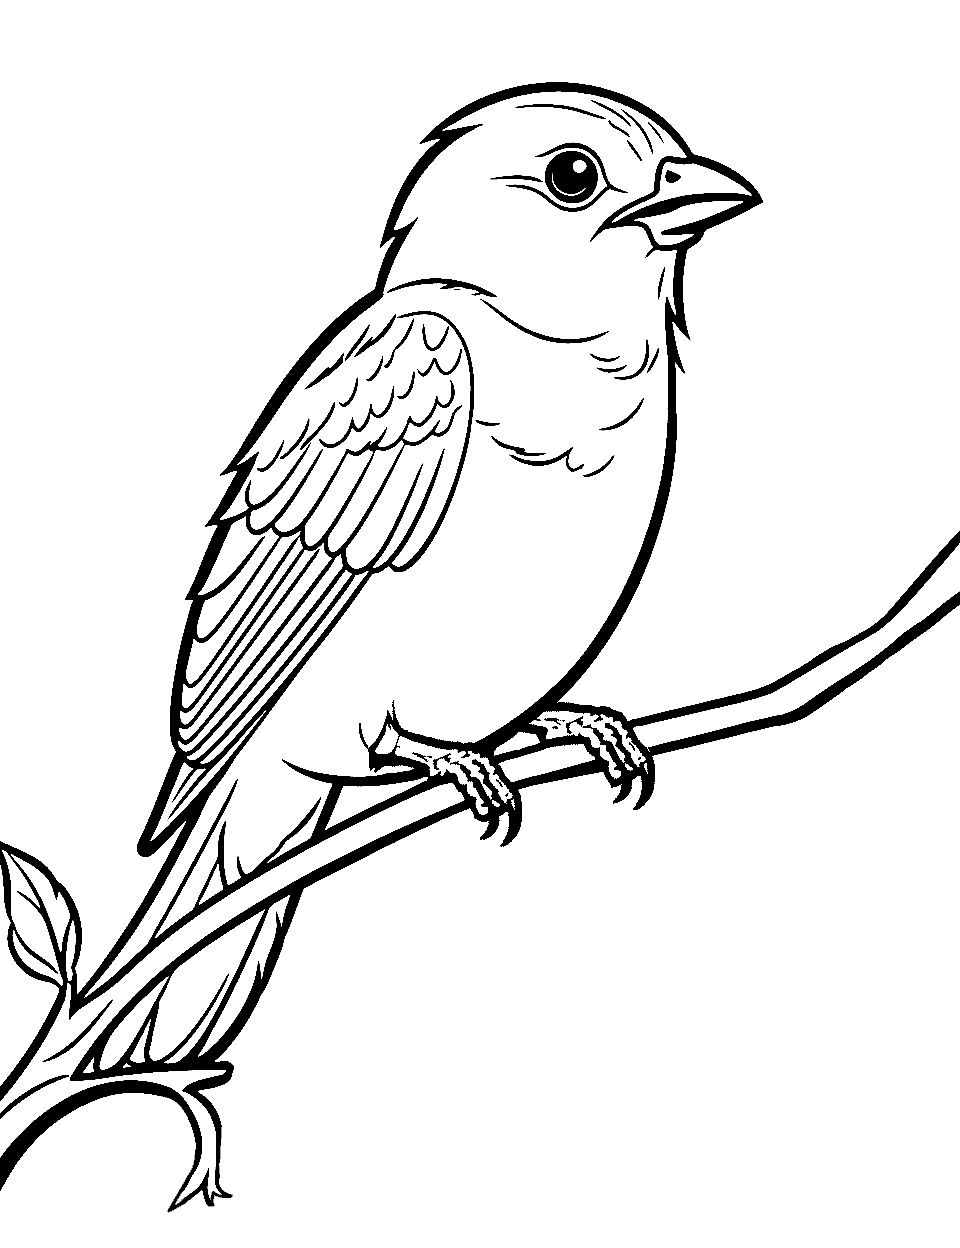 Coloring Page Outline Of A Cute Singing Bird Posters, Art Prints